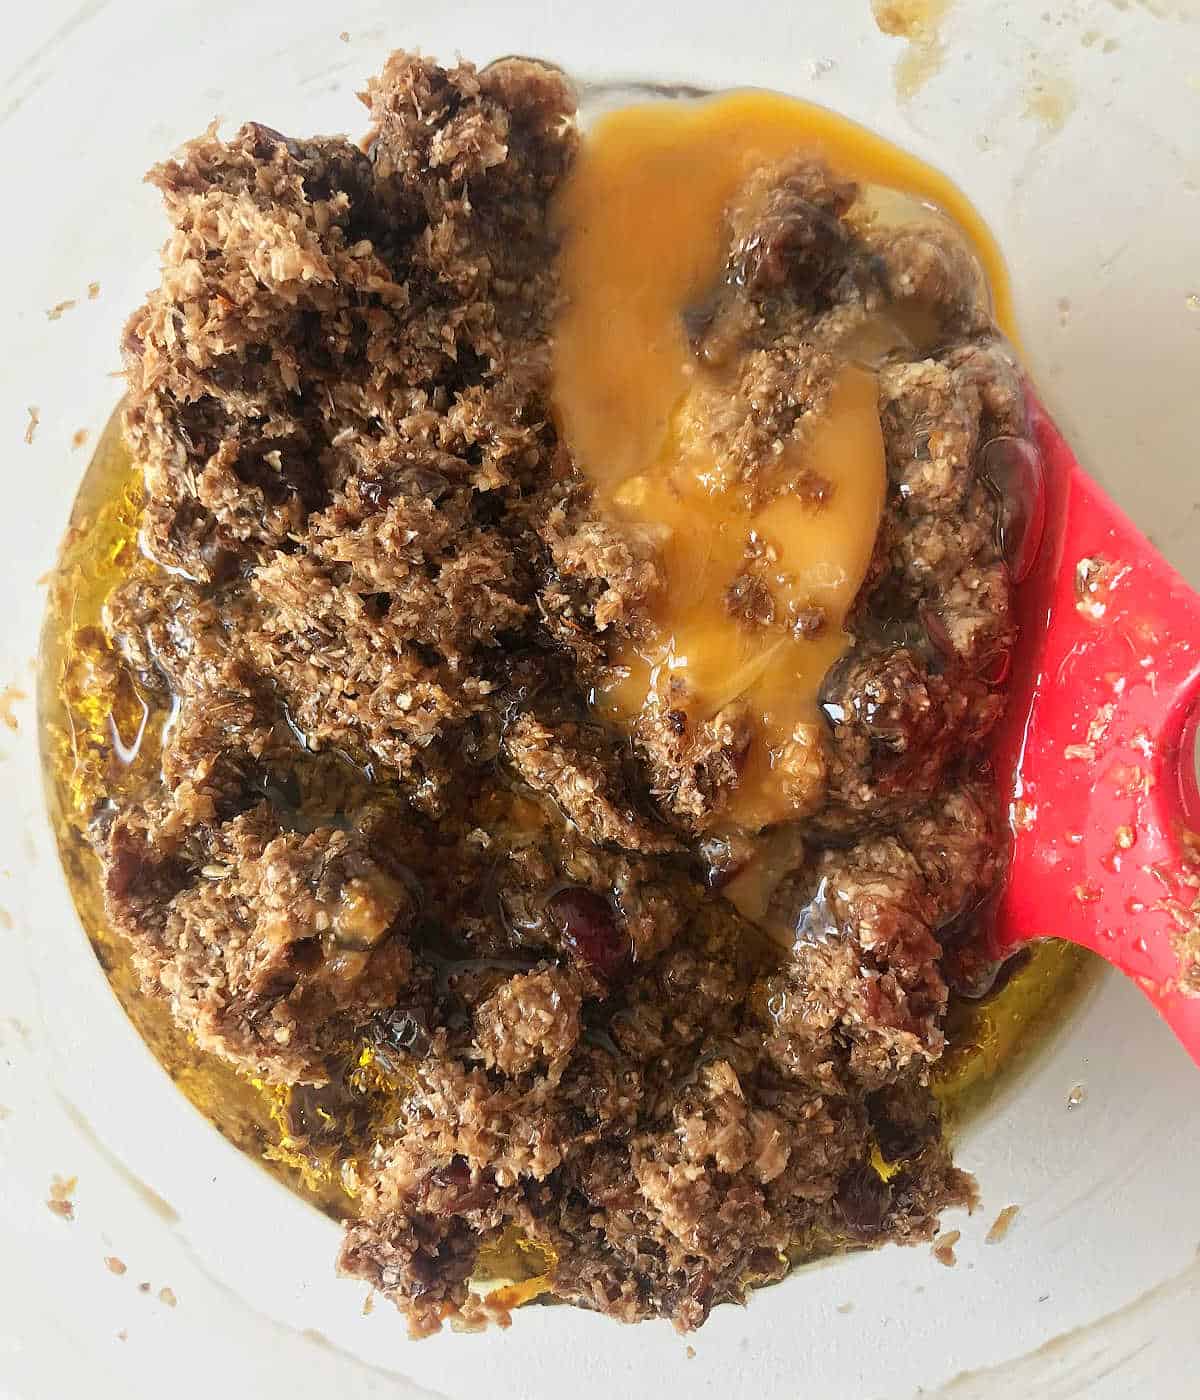 Egg added to raisin bran muffin batter in a bowl with a red spatula.